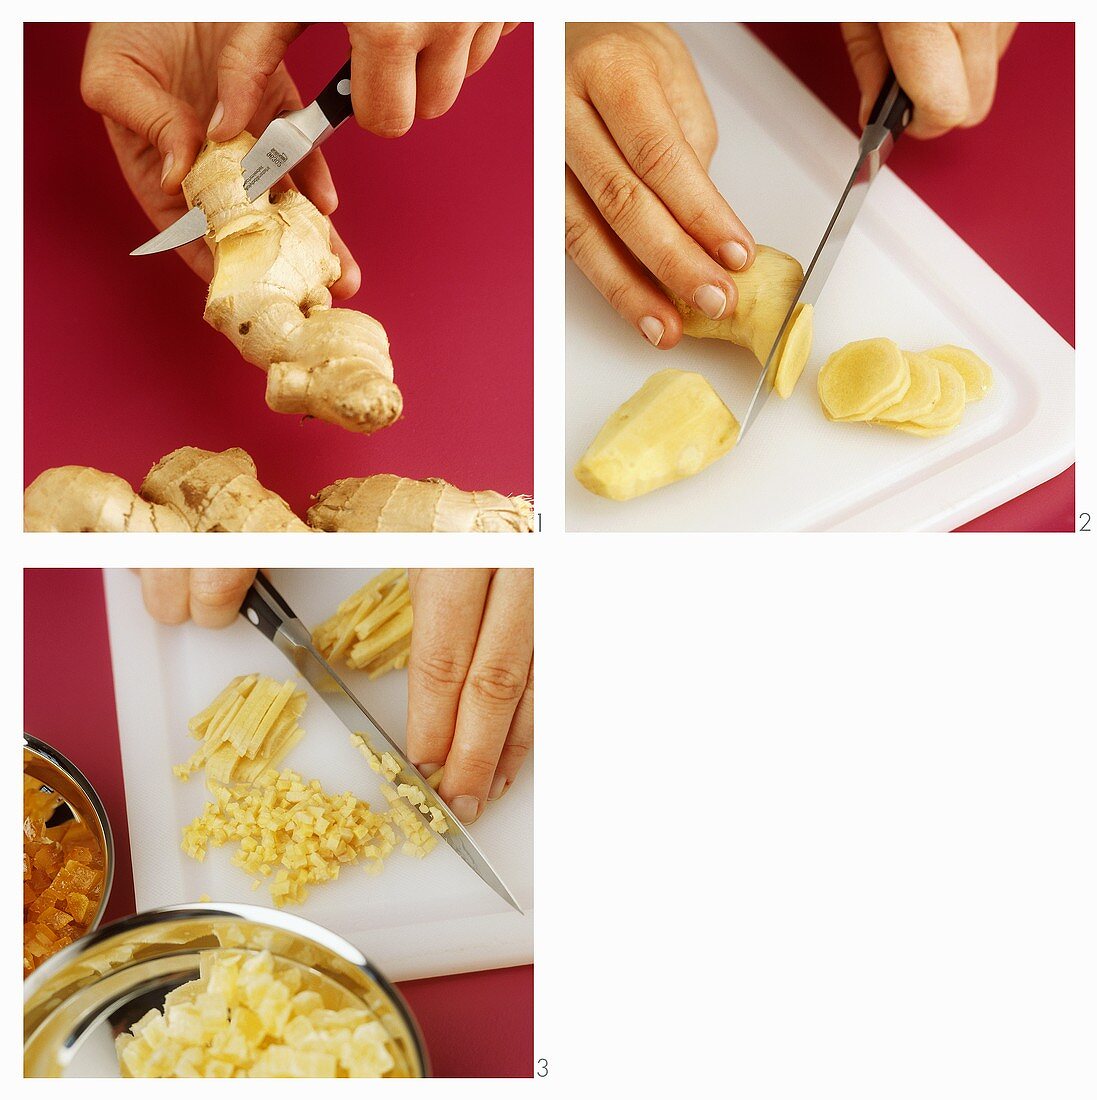 Peeling and dicing ginger root